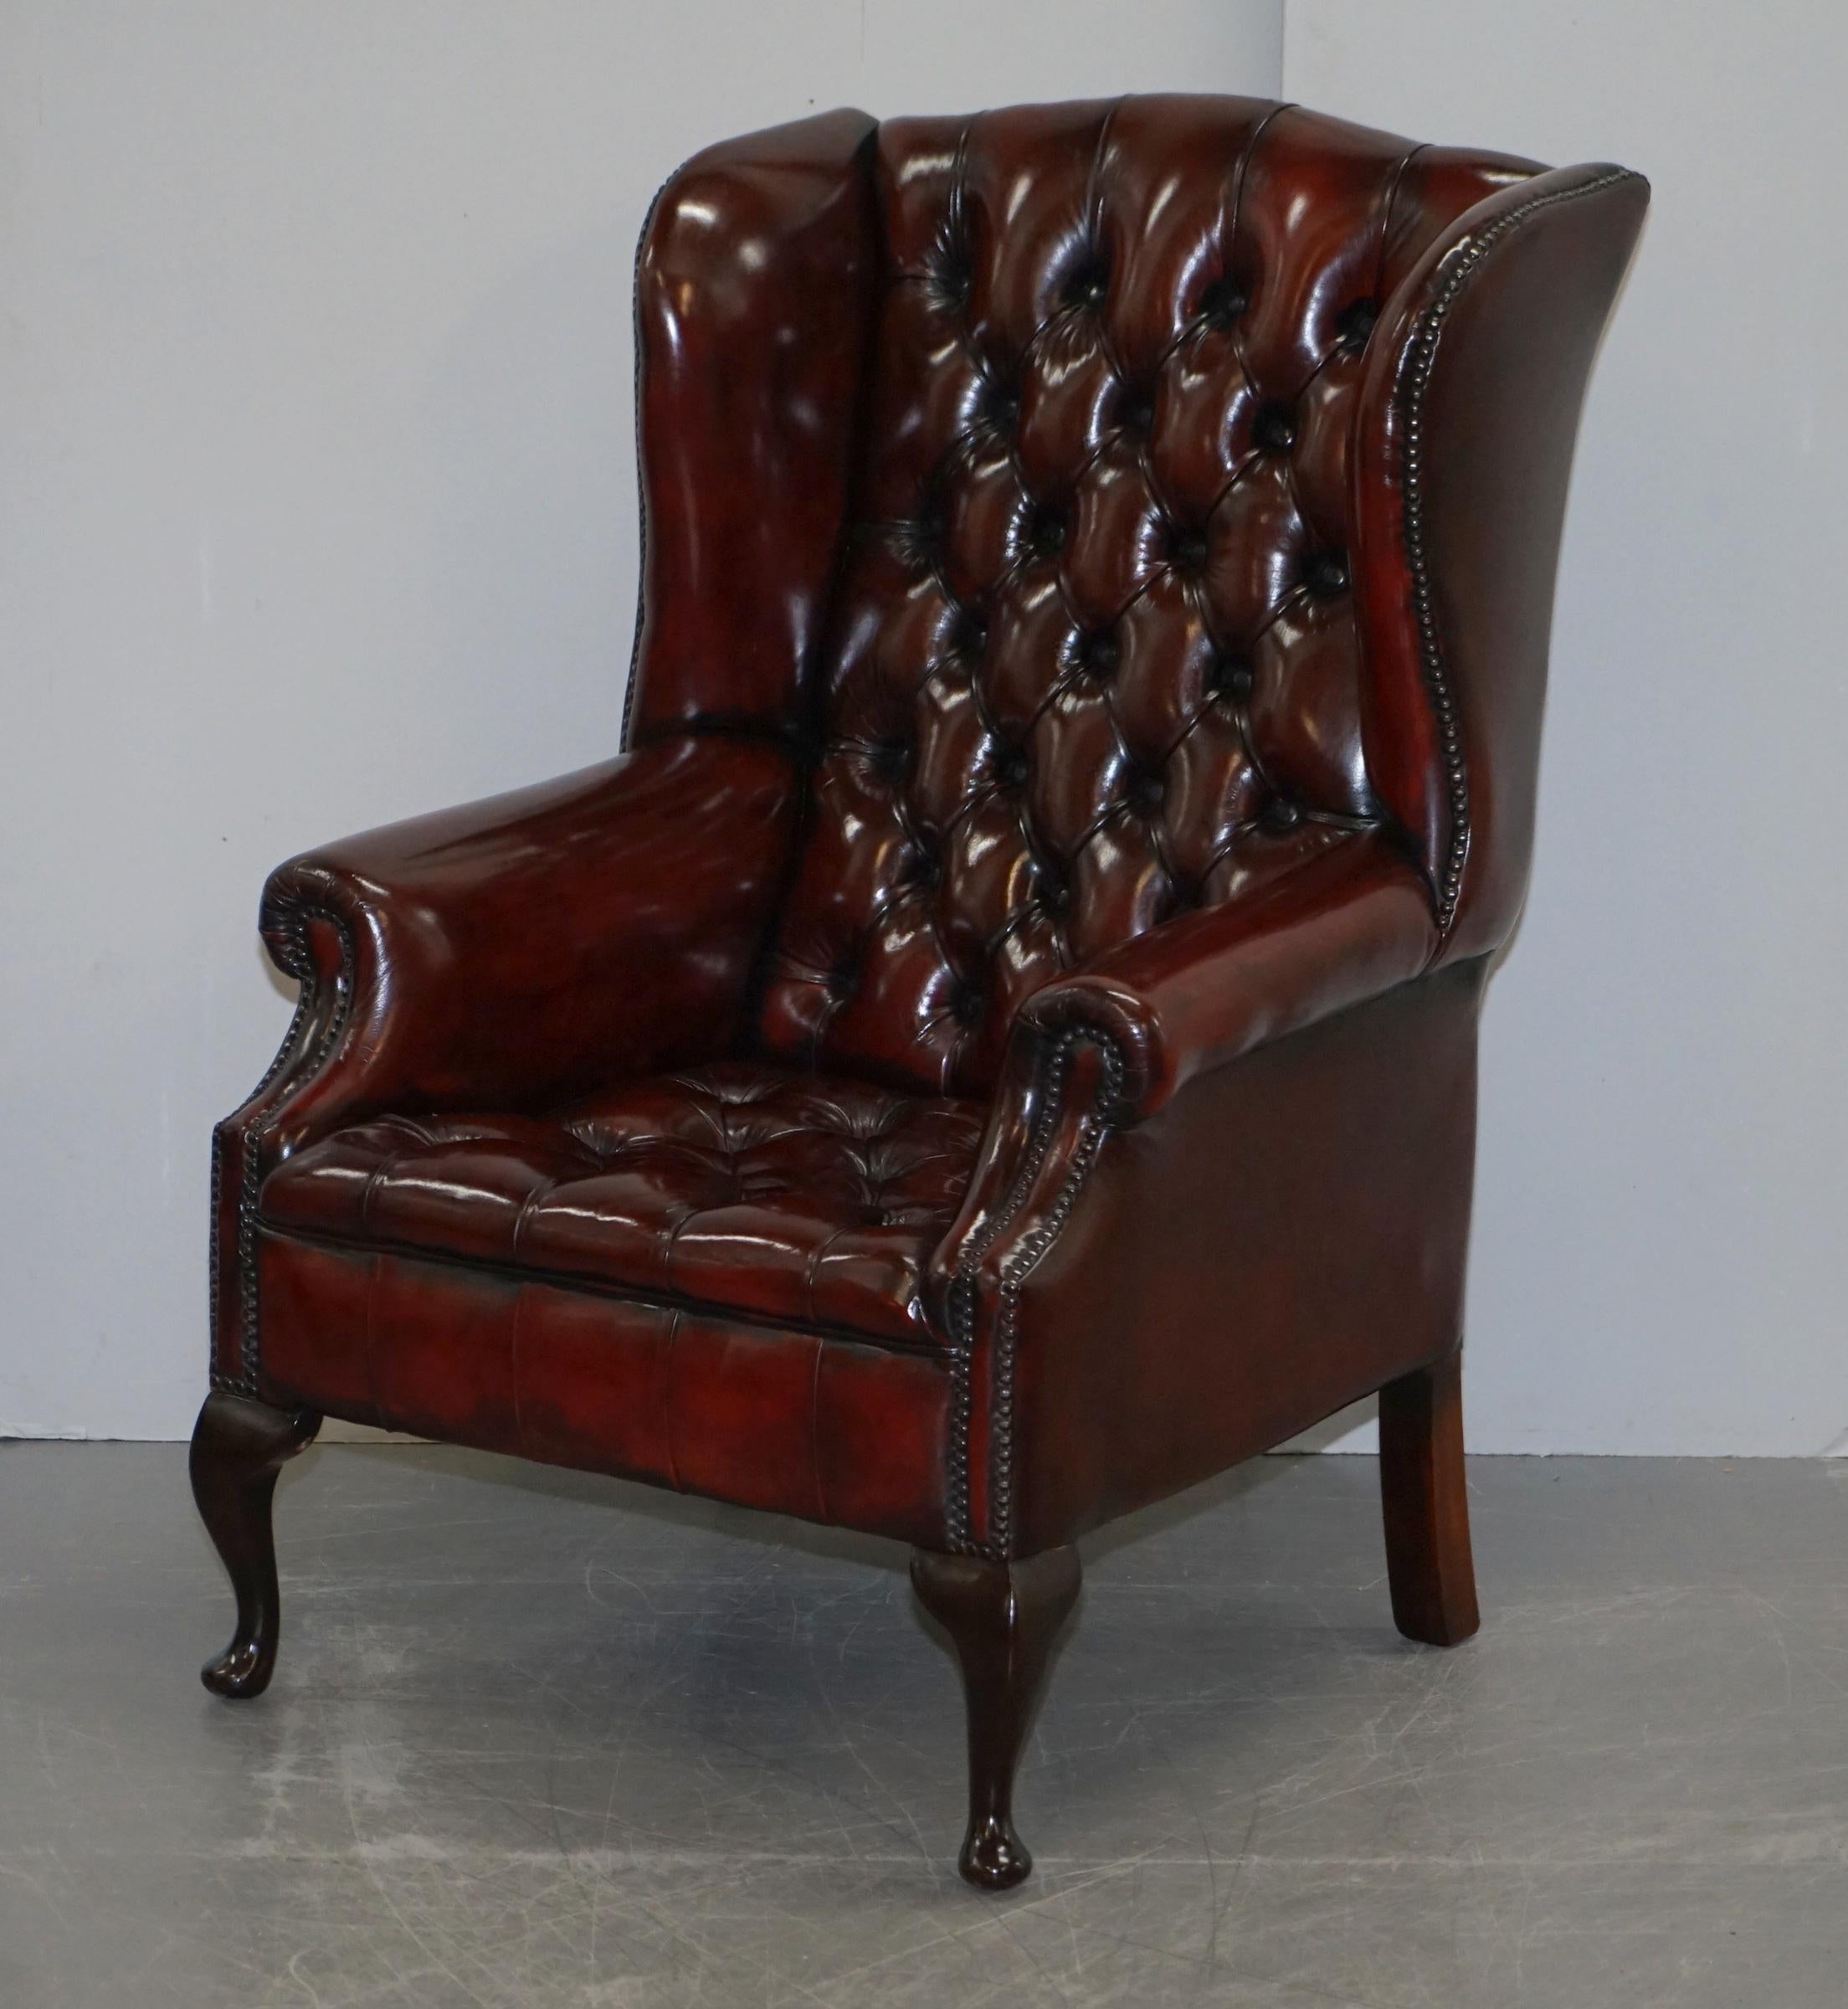 We are delighted to offer for sale this stunning pair of fully restored vintage Chesterfield tufted Oxblood leather wingback armchair

These chairs are a real tour de force, they have absolutely everything going for them, the leather hide is